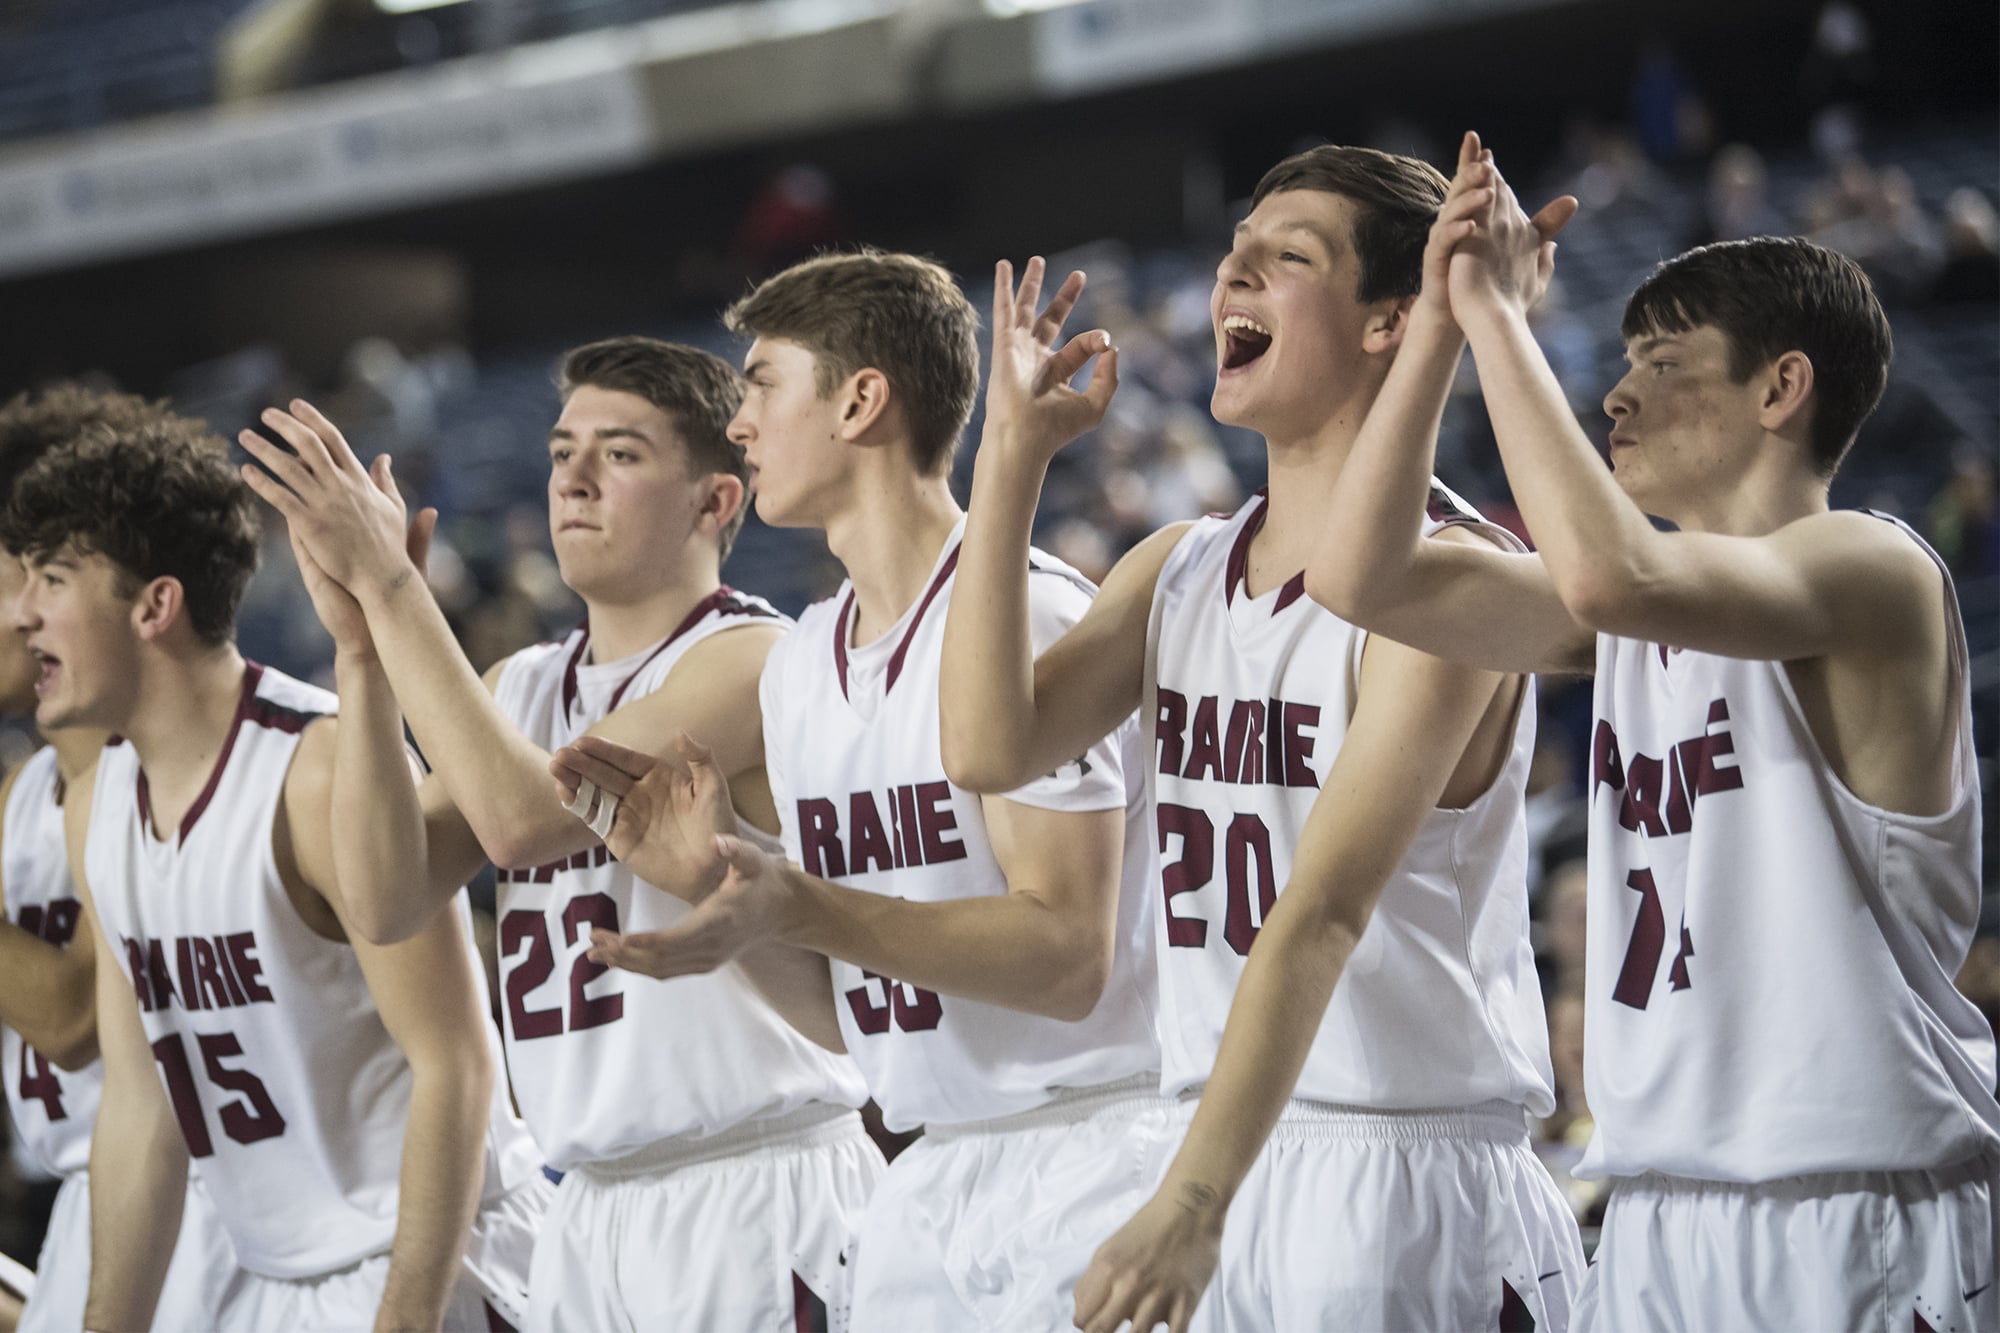 The Prairie bench reacts to a three-point shot in a match against Ingraham during the 3A Hardwood Classic at the Tacoma Dome on Wednesday, Feb. 27, 2019.